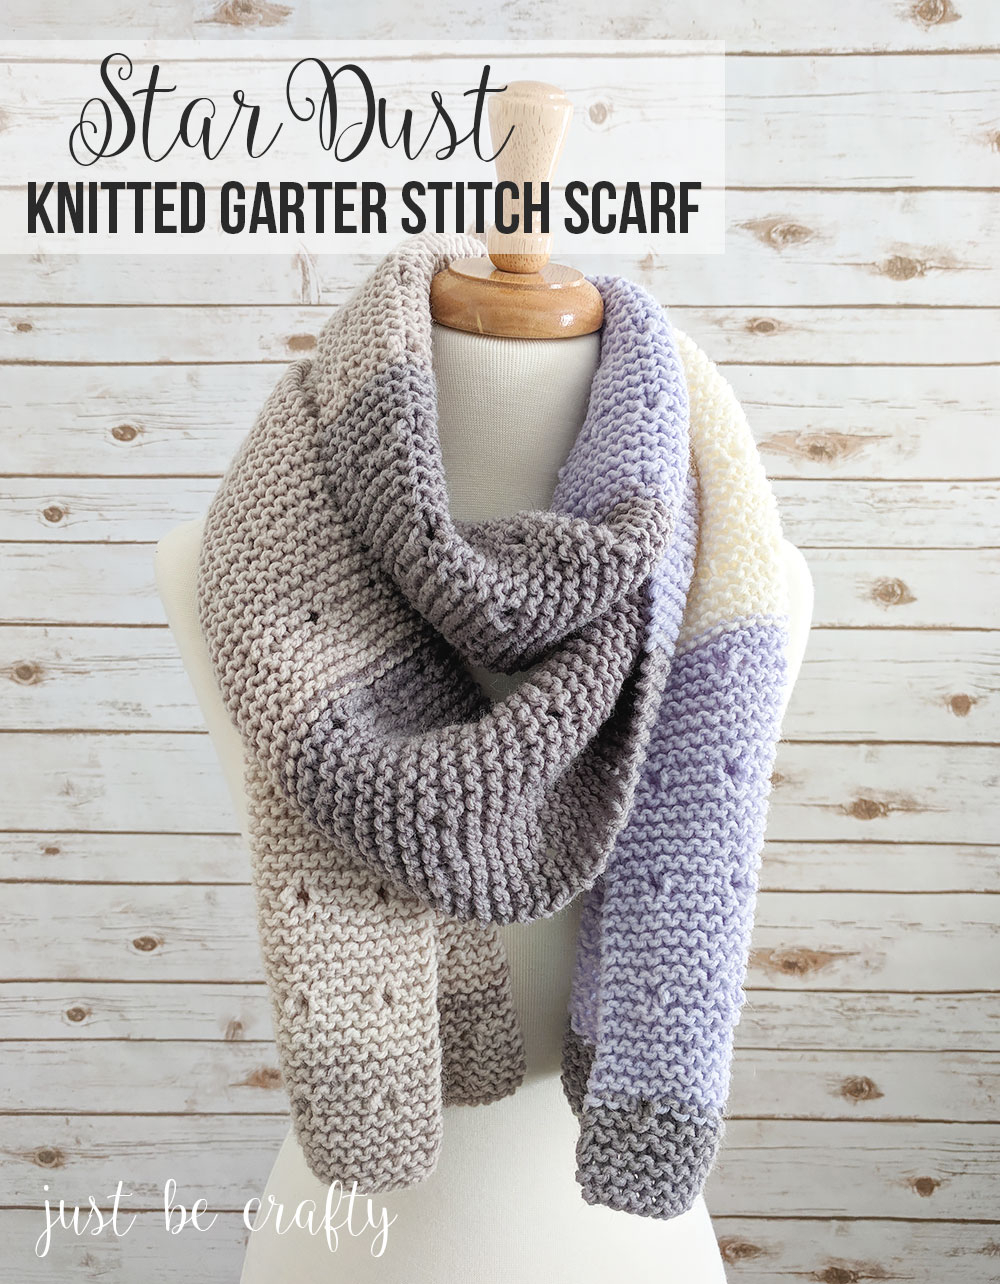 Knitting Pattern For Scarfs Star Dust Knitted Garter Stitch Scarf Pattern Just Be Crafty